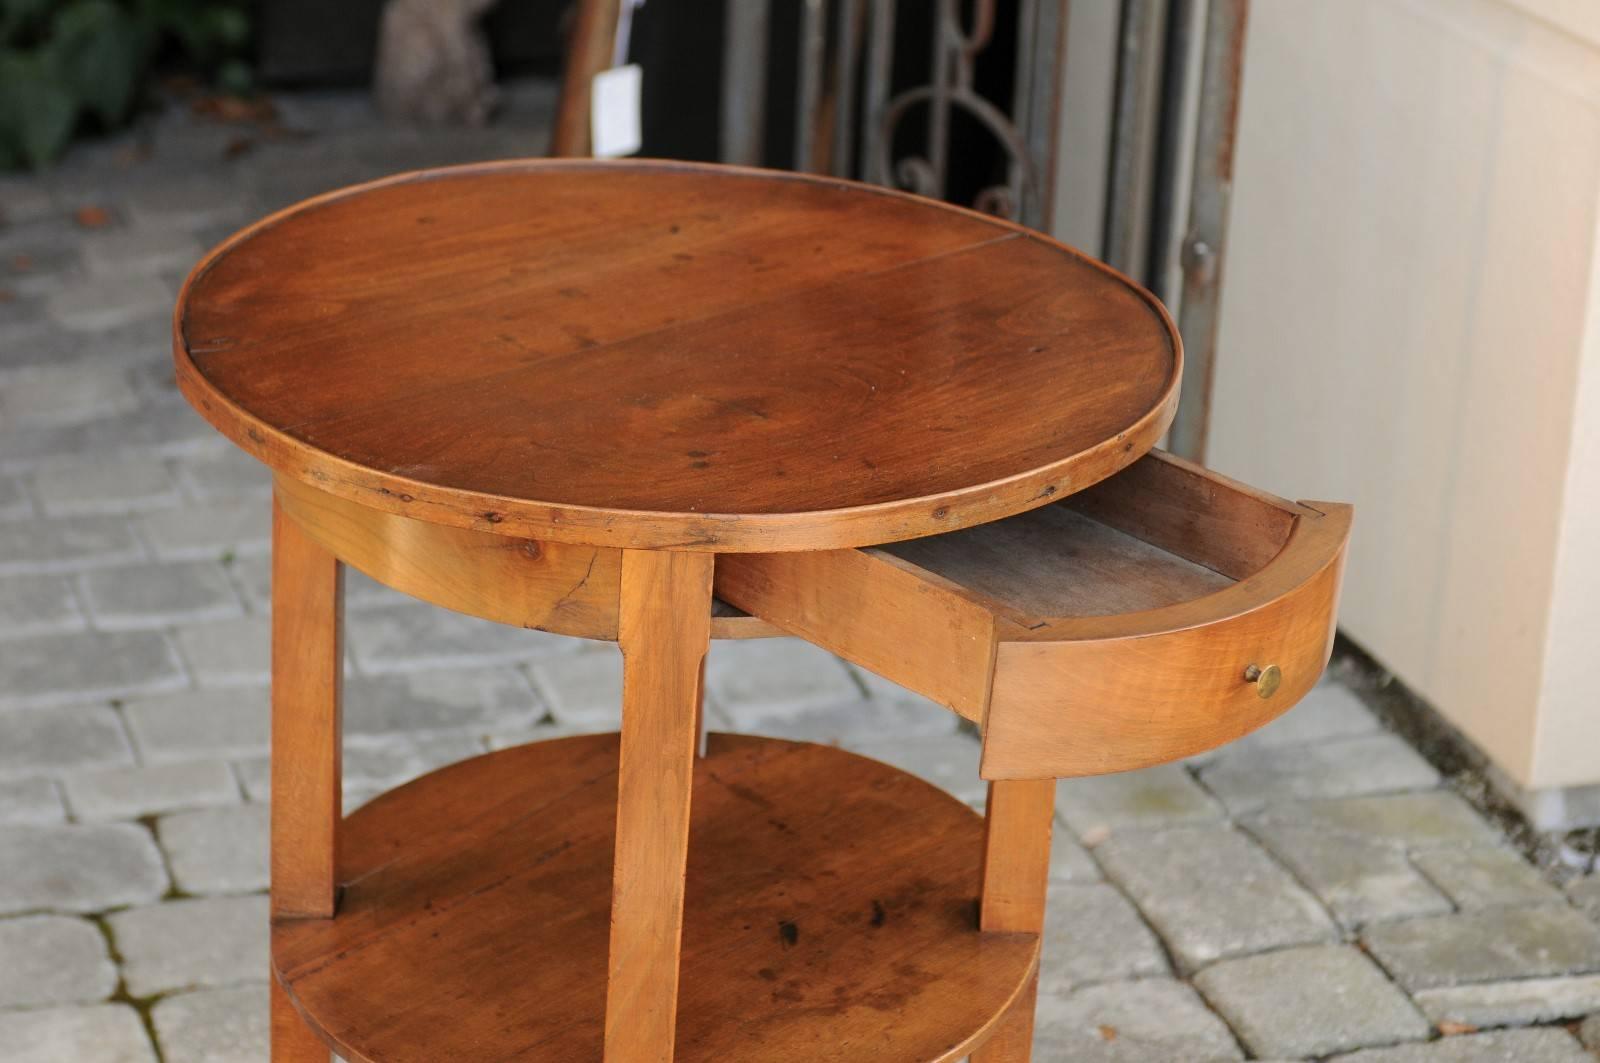 French Circular Side Table with Single Drawer and Lower Shelf from the 1840s 1